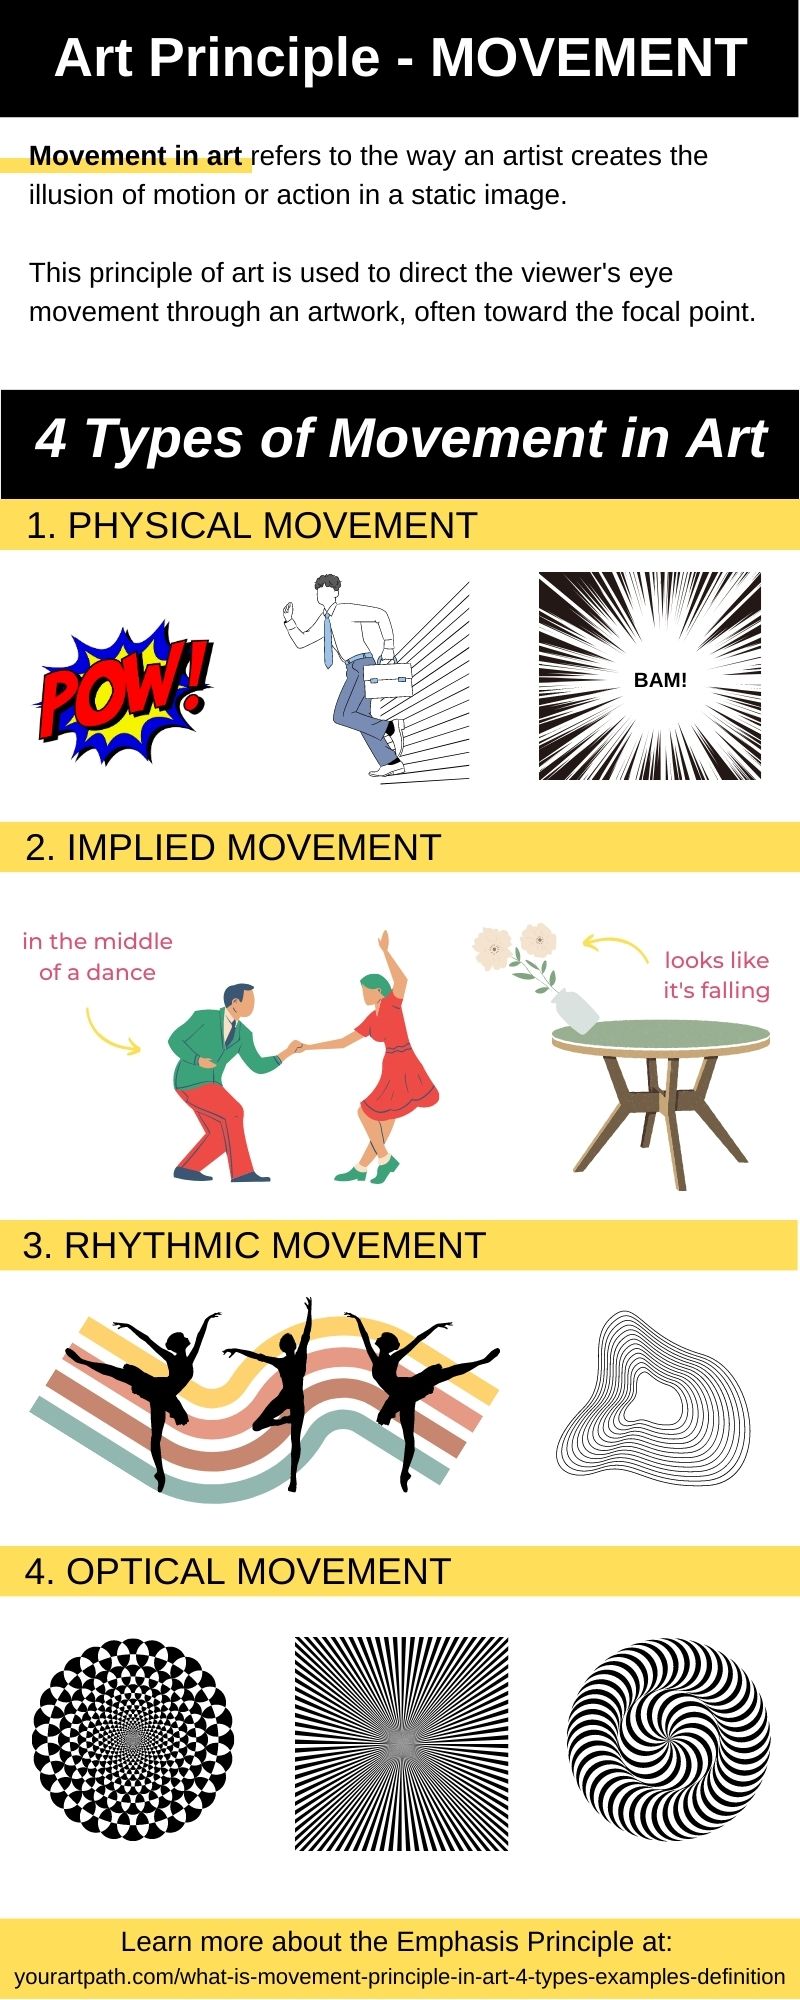 What are the 4 types of movement?